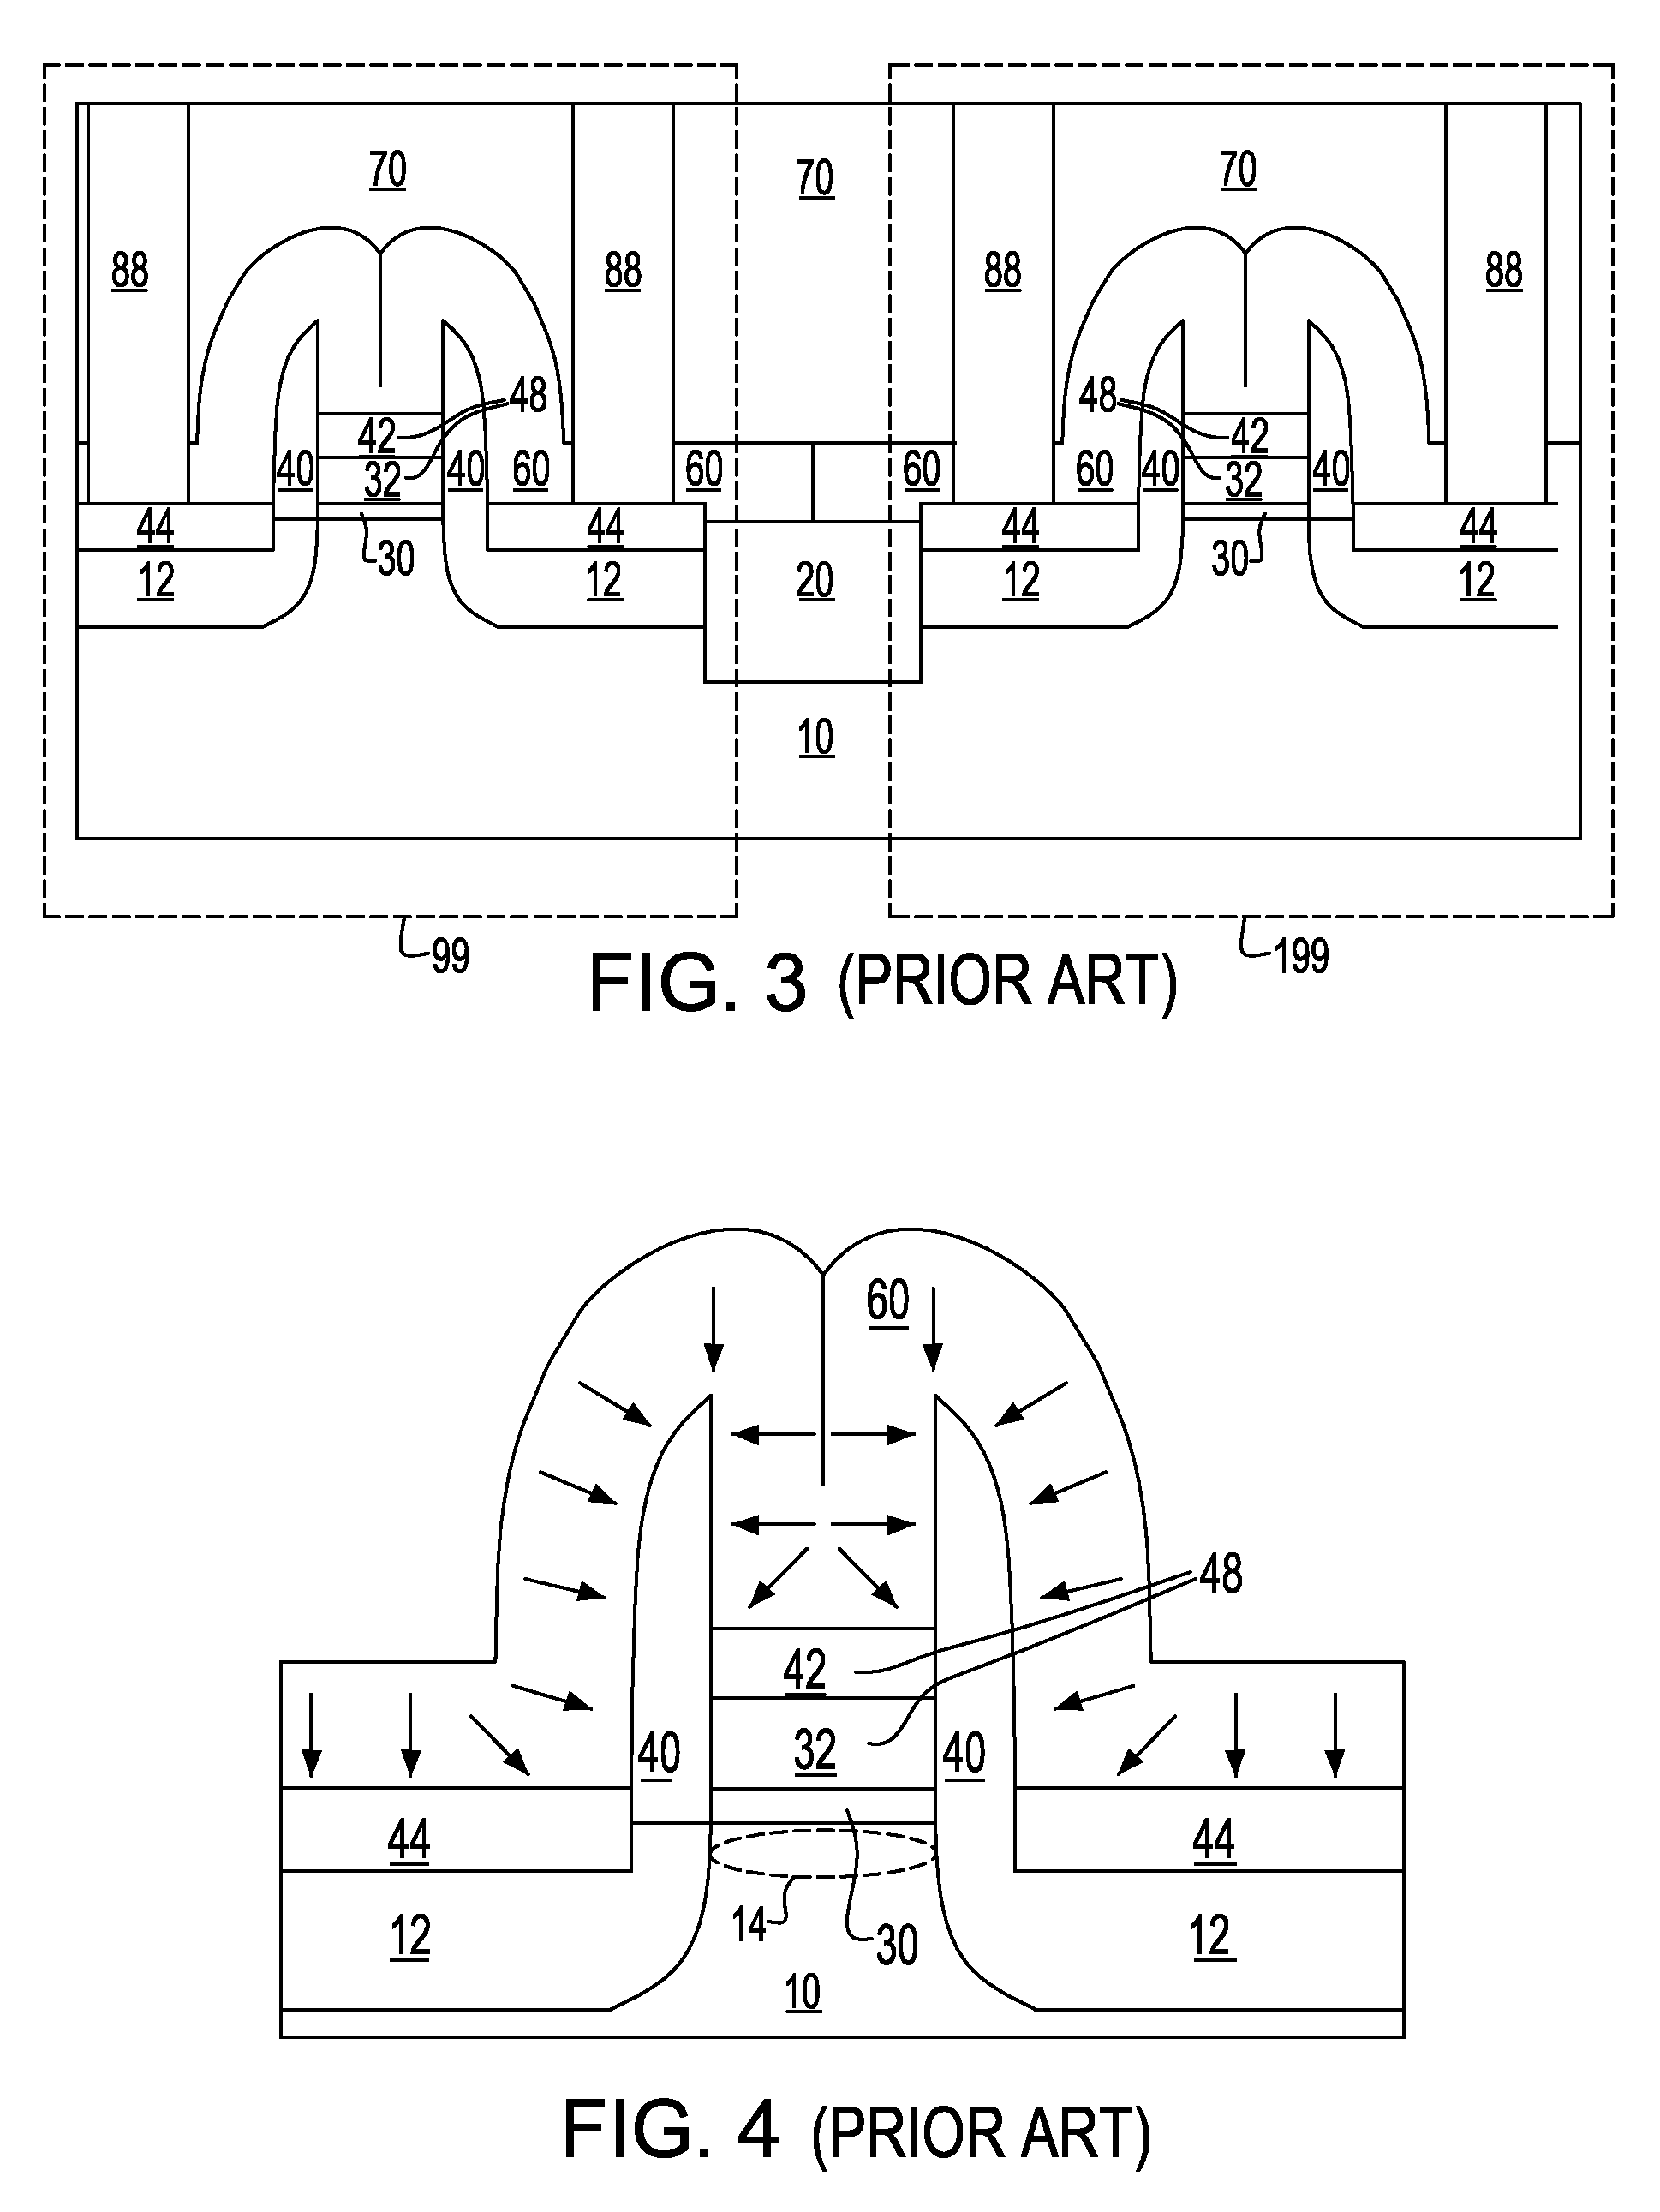 Semiconductor structure for low parasitic gate capacitance